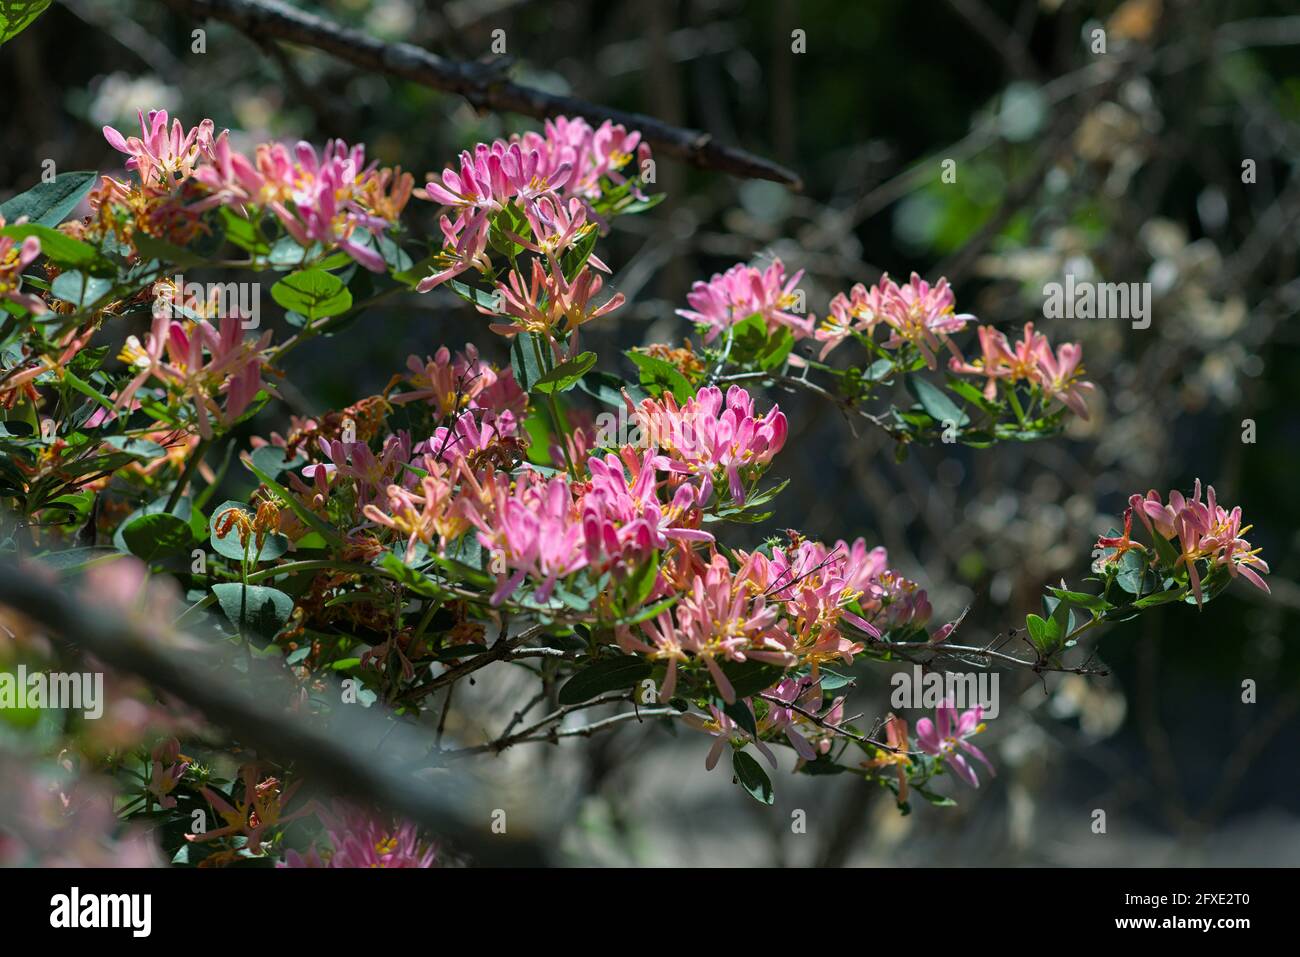 Gorgeous pink blossom of a honeysuckle (Lonicera tatarica) in full spring bloom in a garden in Ottawa, Ontario, Canada. Stock Photo